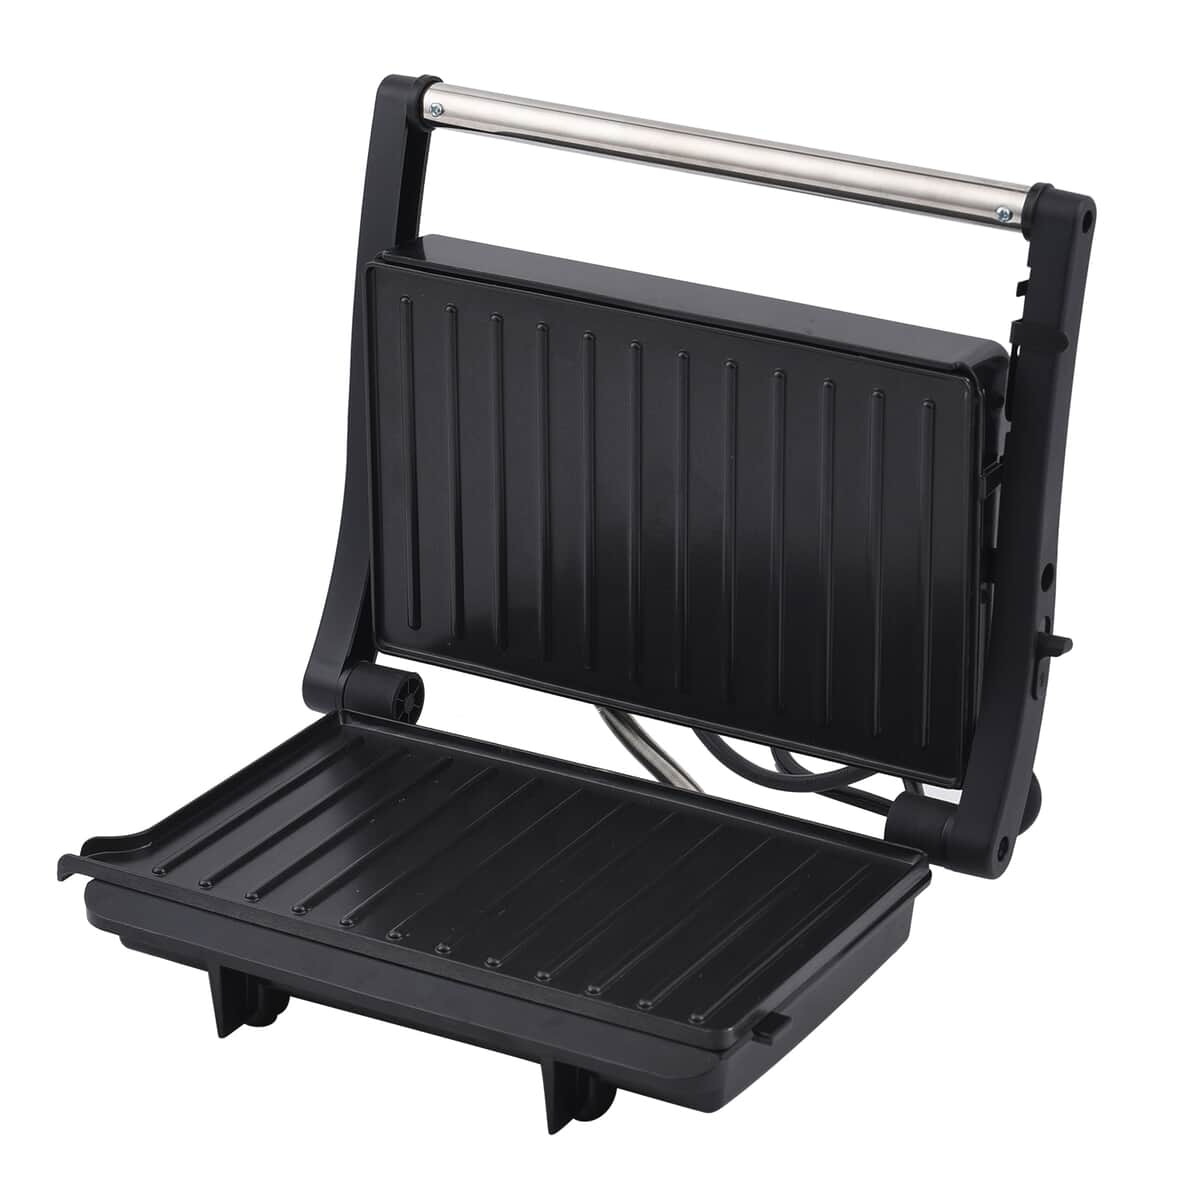 Homesmart Black 2-Slice Press Grill with Non-Stick Coating and Floating Hinge System image number 5